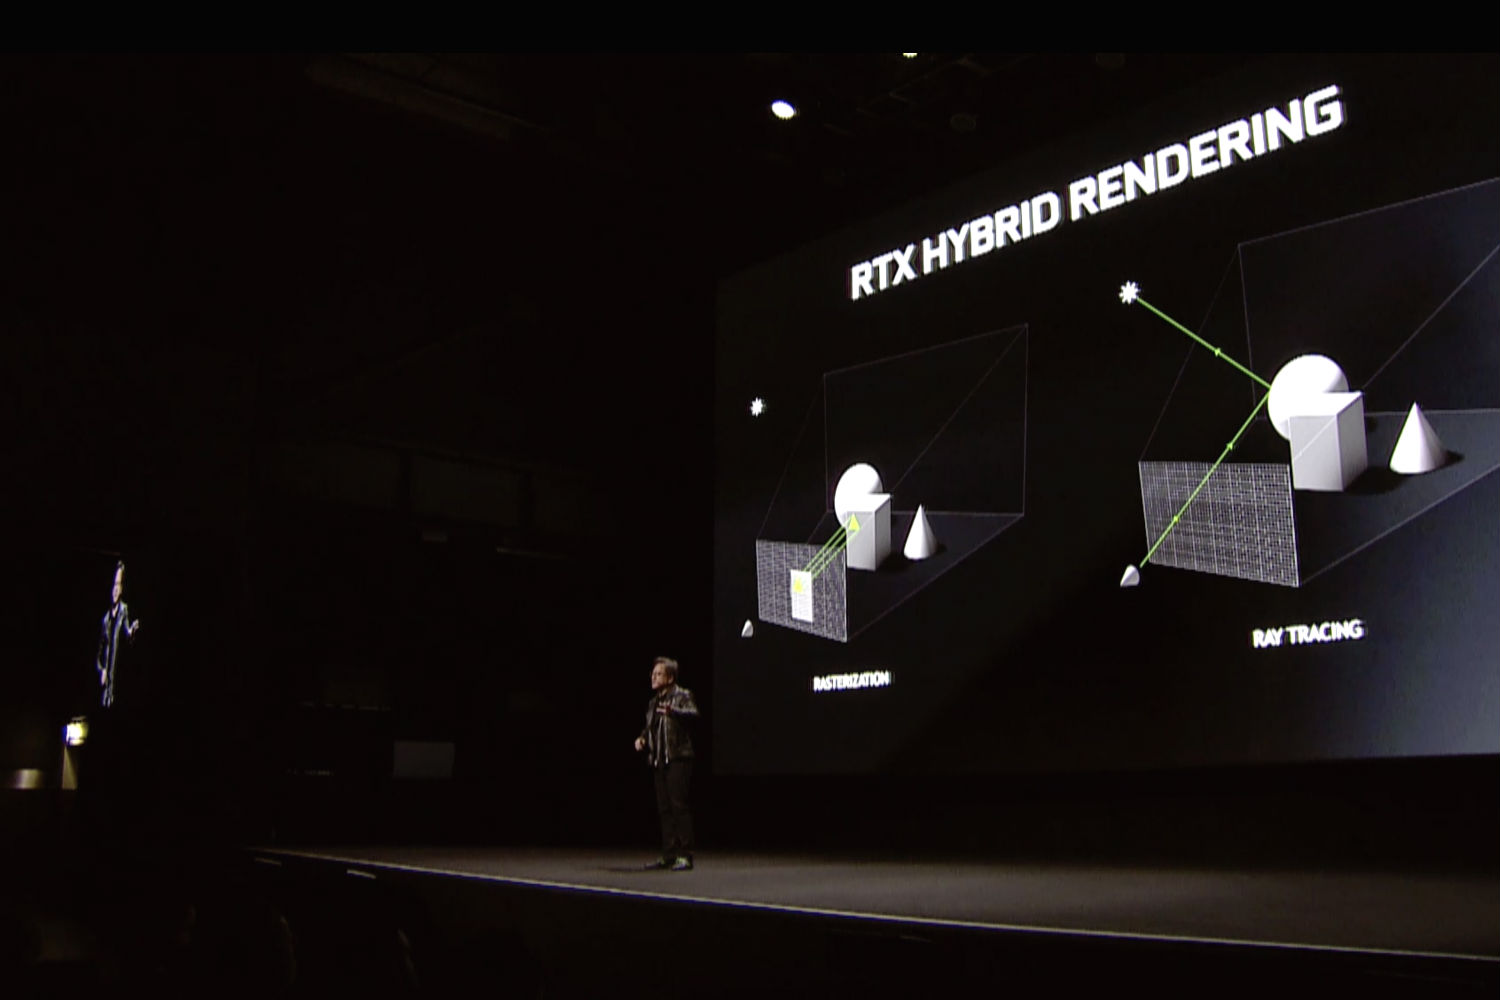 Minecraft Getting Real-Time Ray Tracing » The TV Rejects